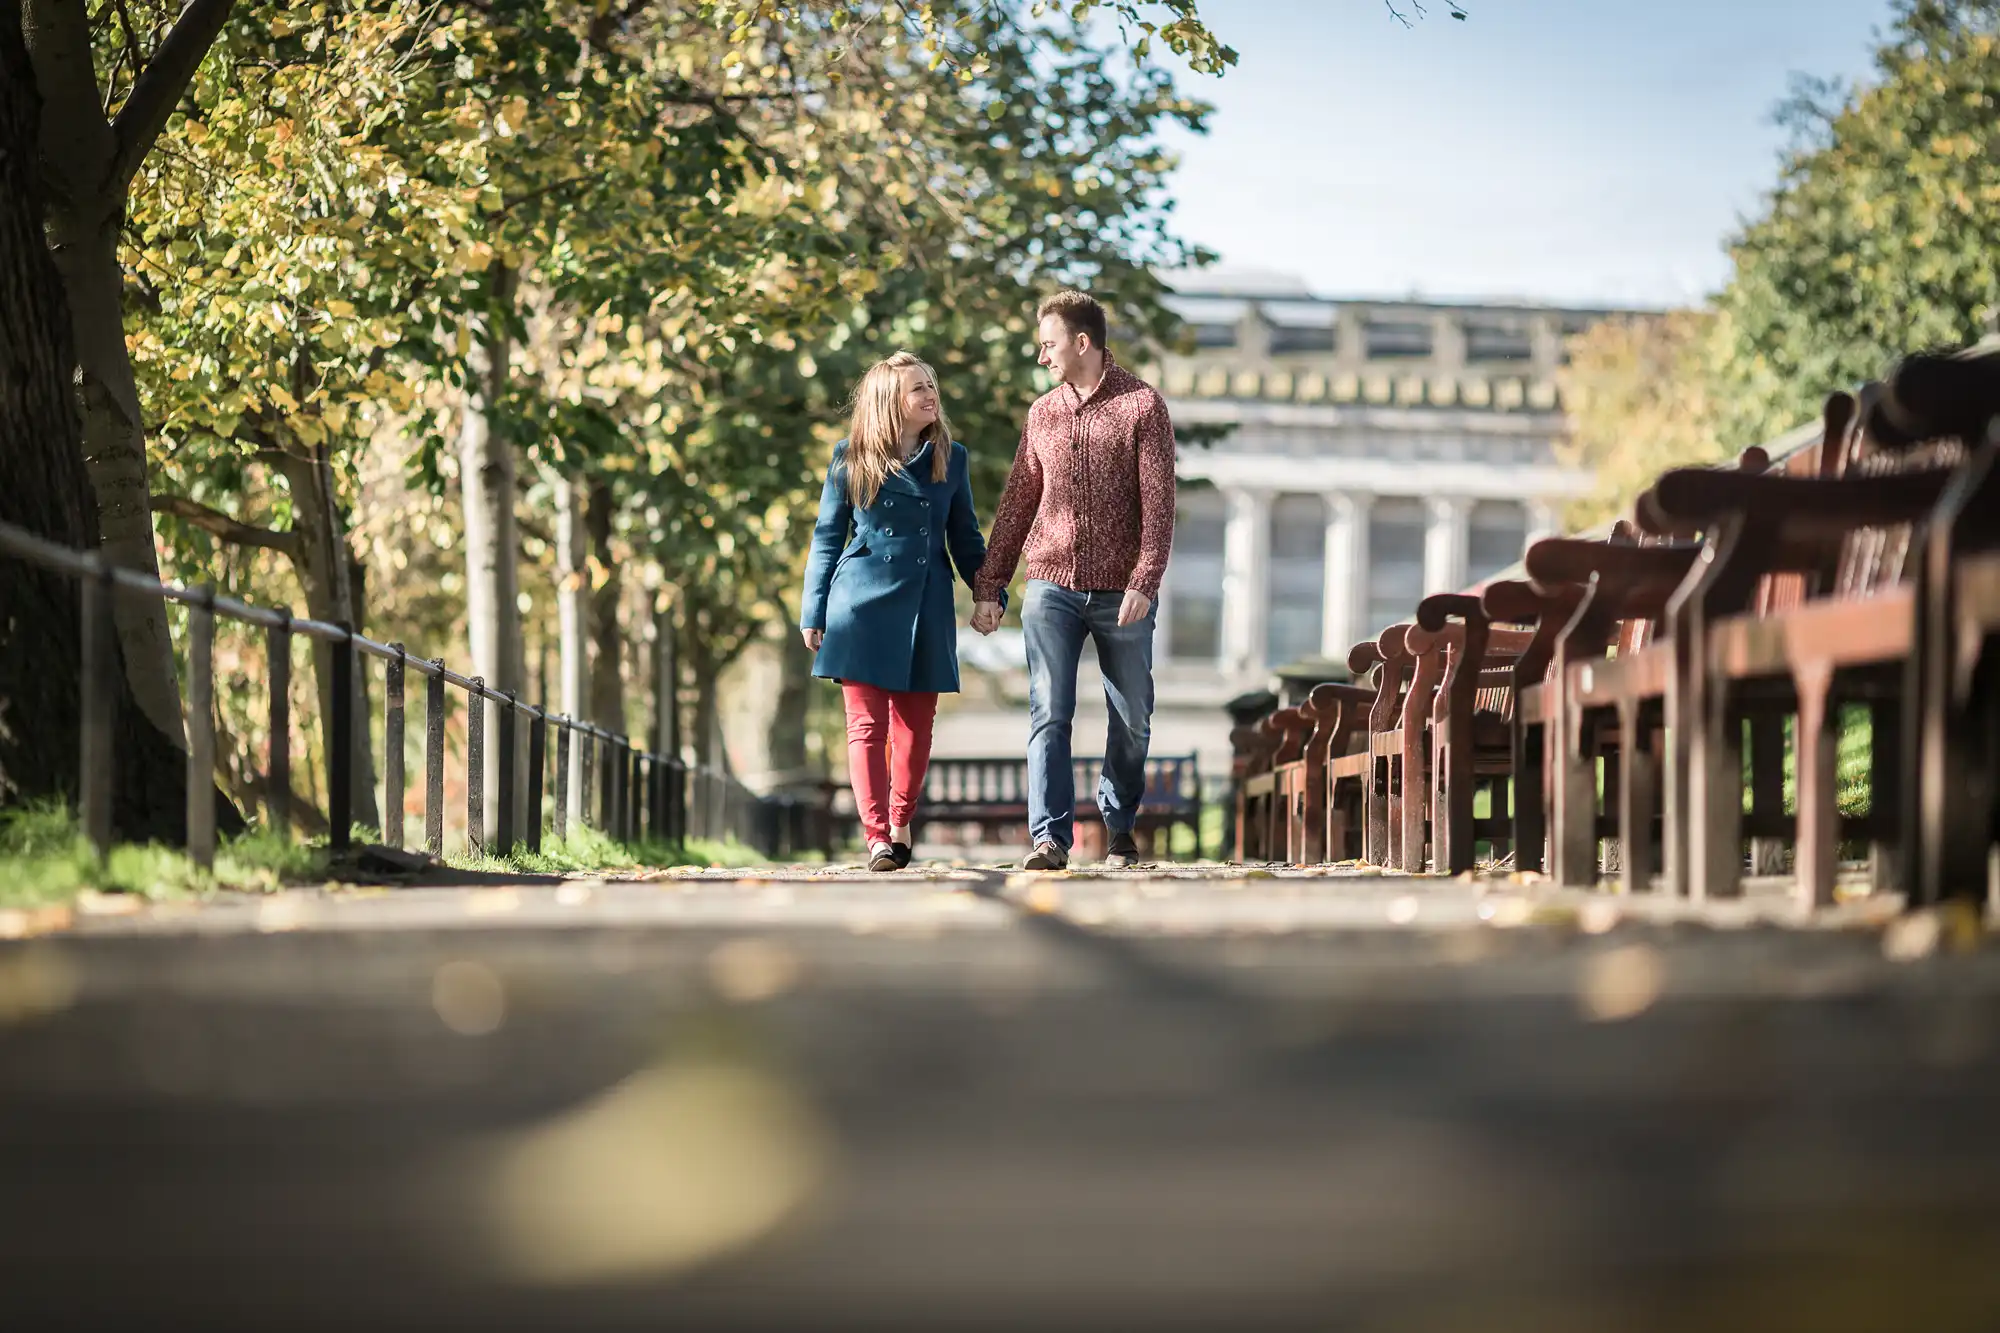 A couple walks hand in hand down a leafy park path, flanked by wooden benches, with classical architecture in the background on a sunny day.